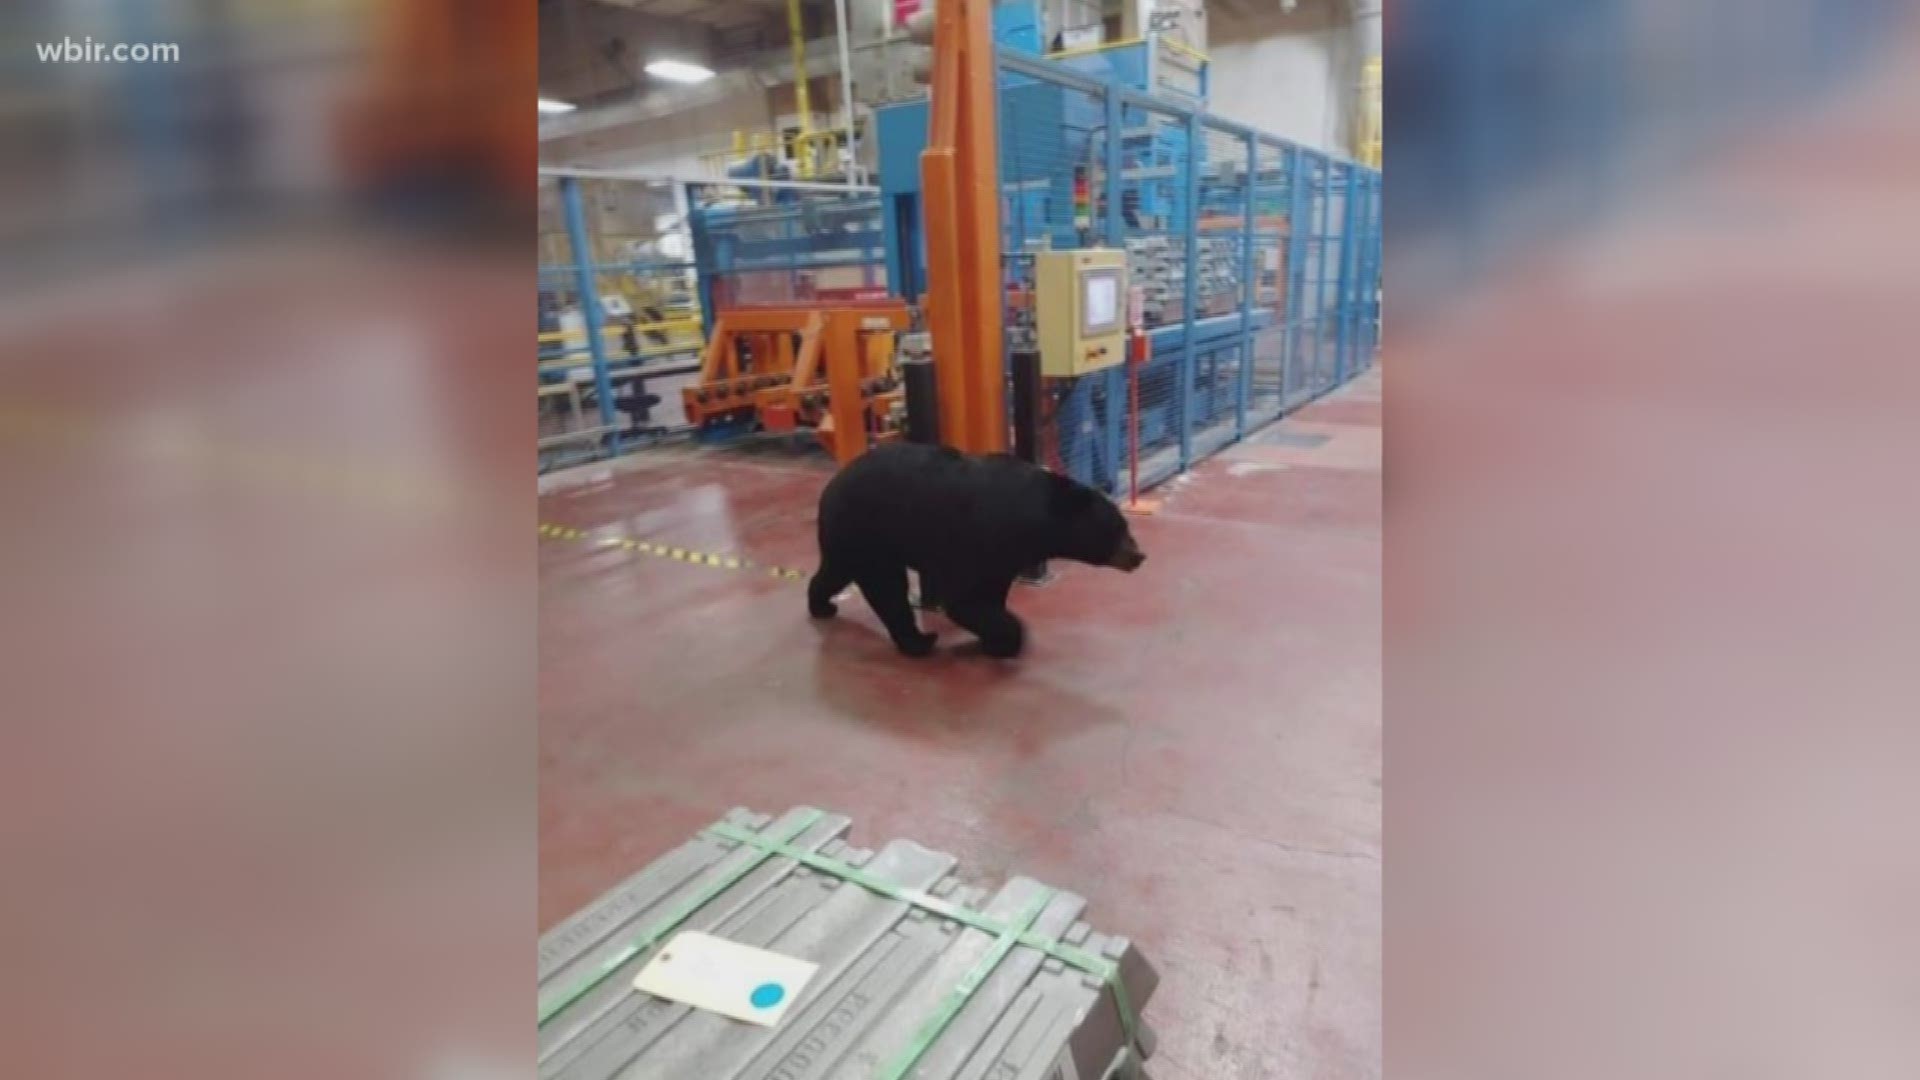 Wildlife authorities say a bear has been trapped after it got inside the DENSO manufacturing plant in Maryville.